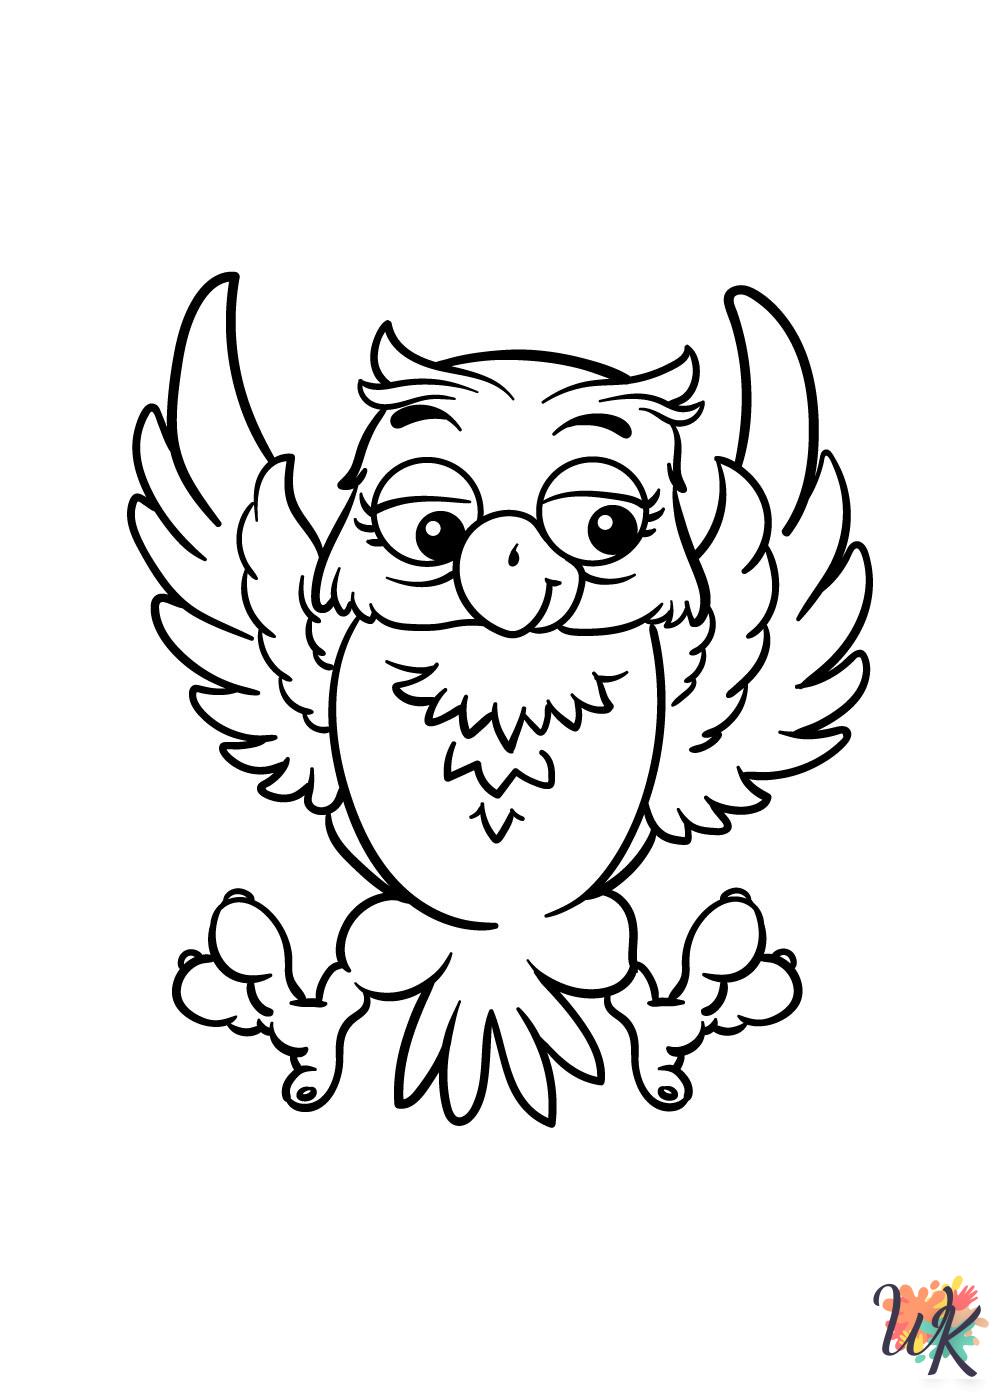 kawaii cute Owl coloring pages